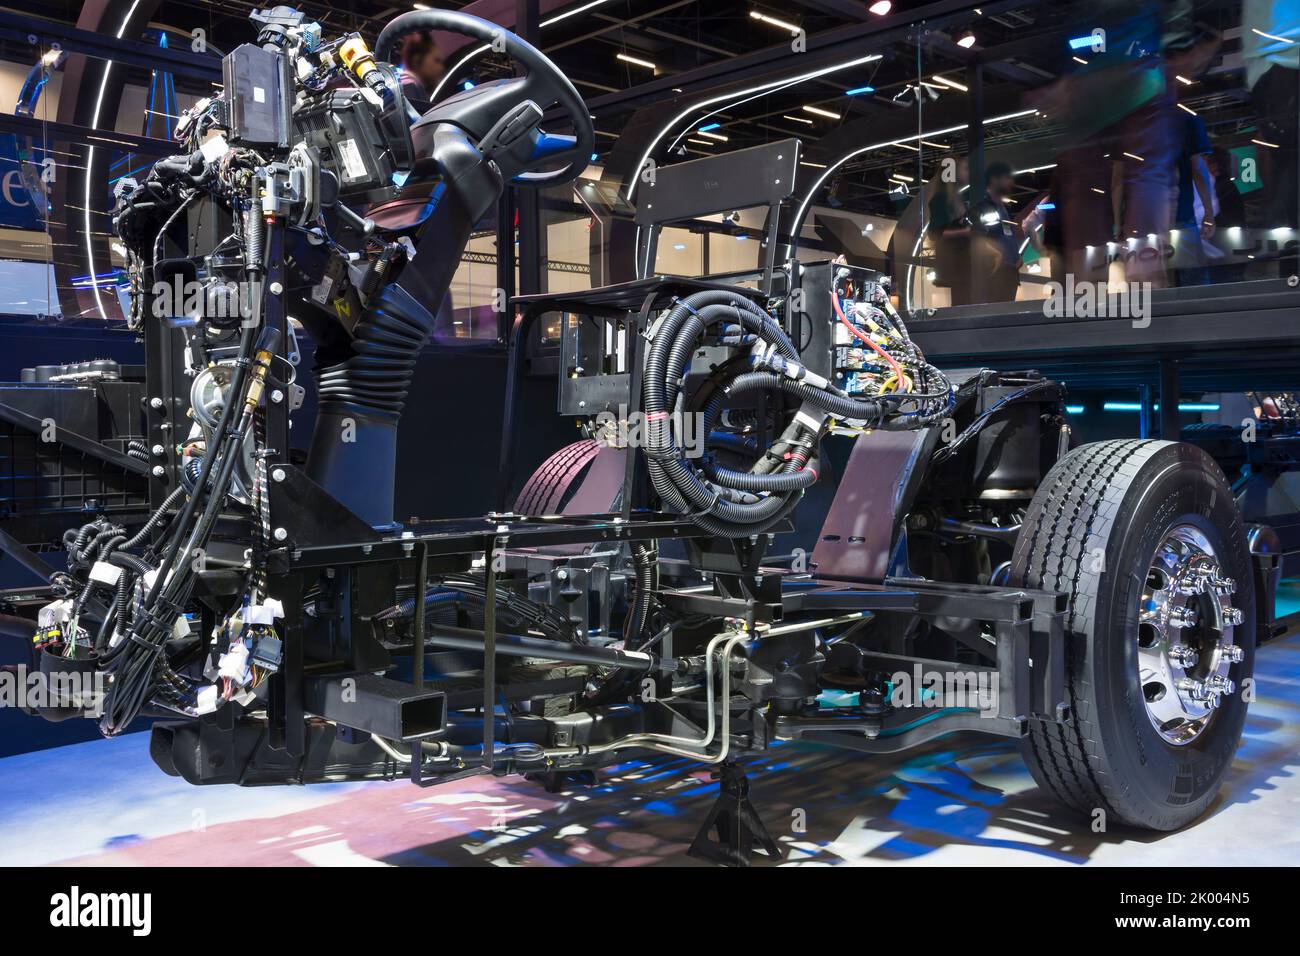 Exposed chassis, engine, gears and motor of a bus on display at the LAT.BUS 2022 exposition, held in the city of São Paulo. Stock Photo